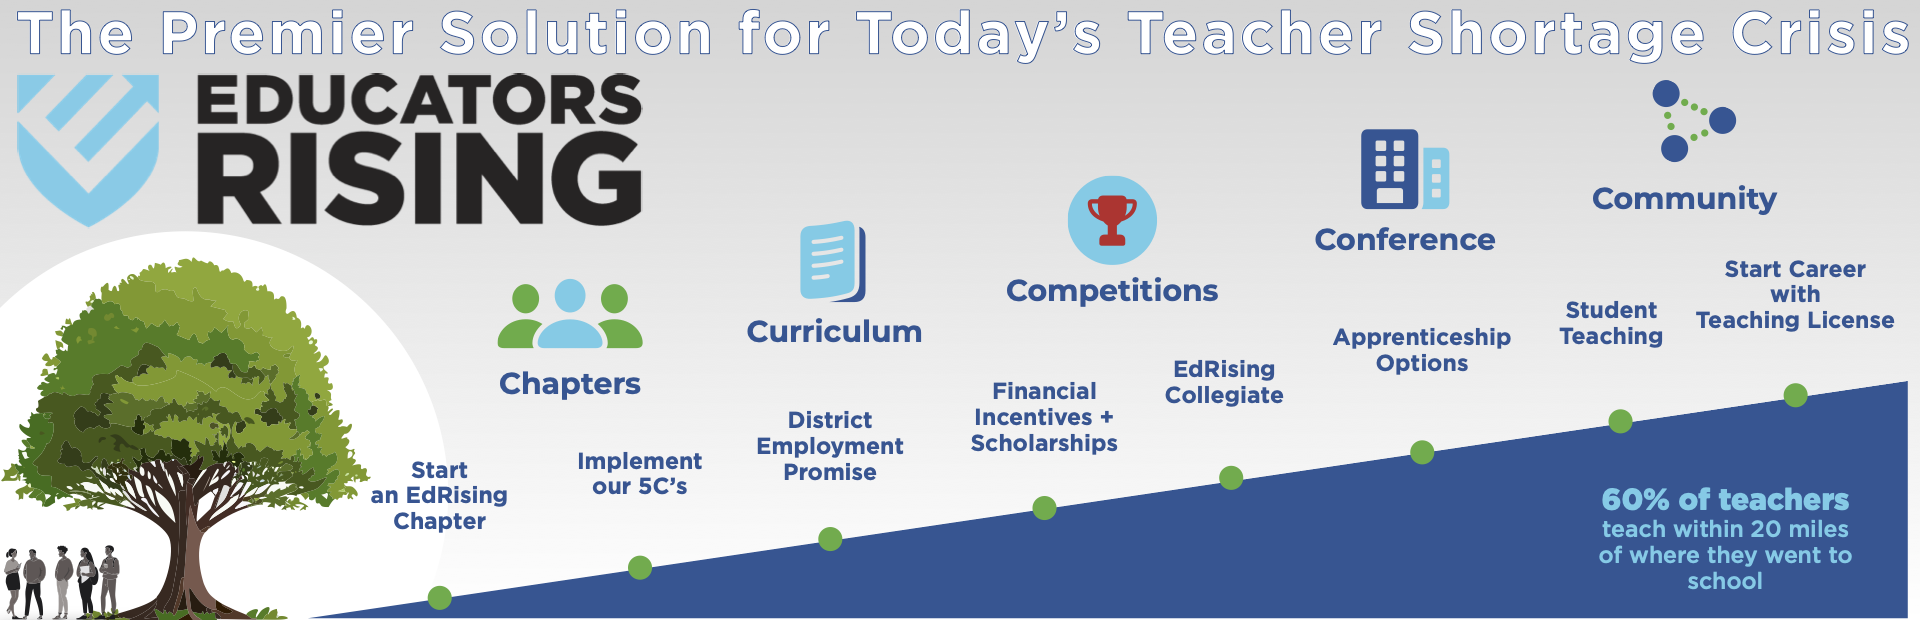 Educators Rising Pathway Includes our 5Cs and a ten-step process for Grow Your Own